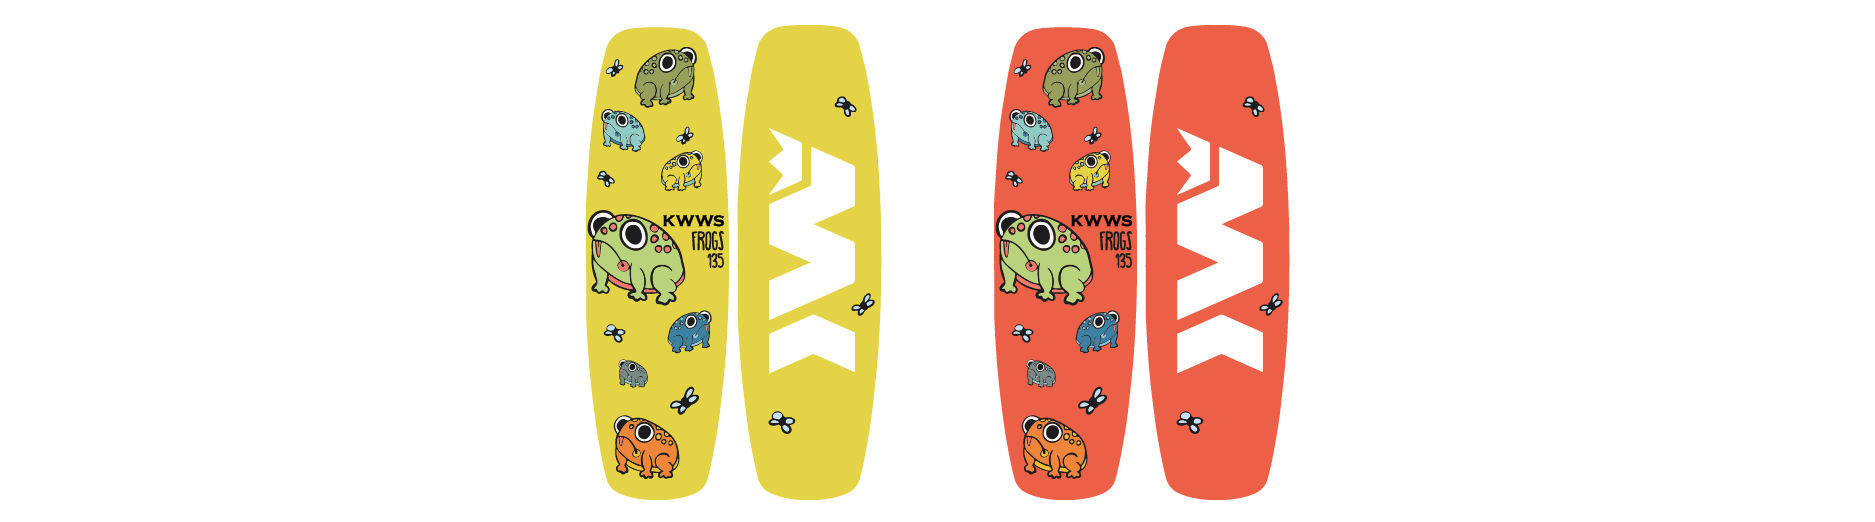 New #KWBoards available